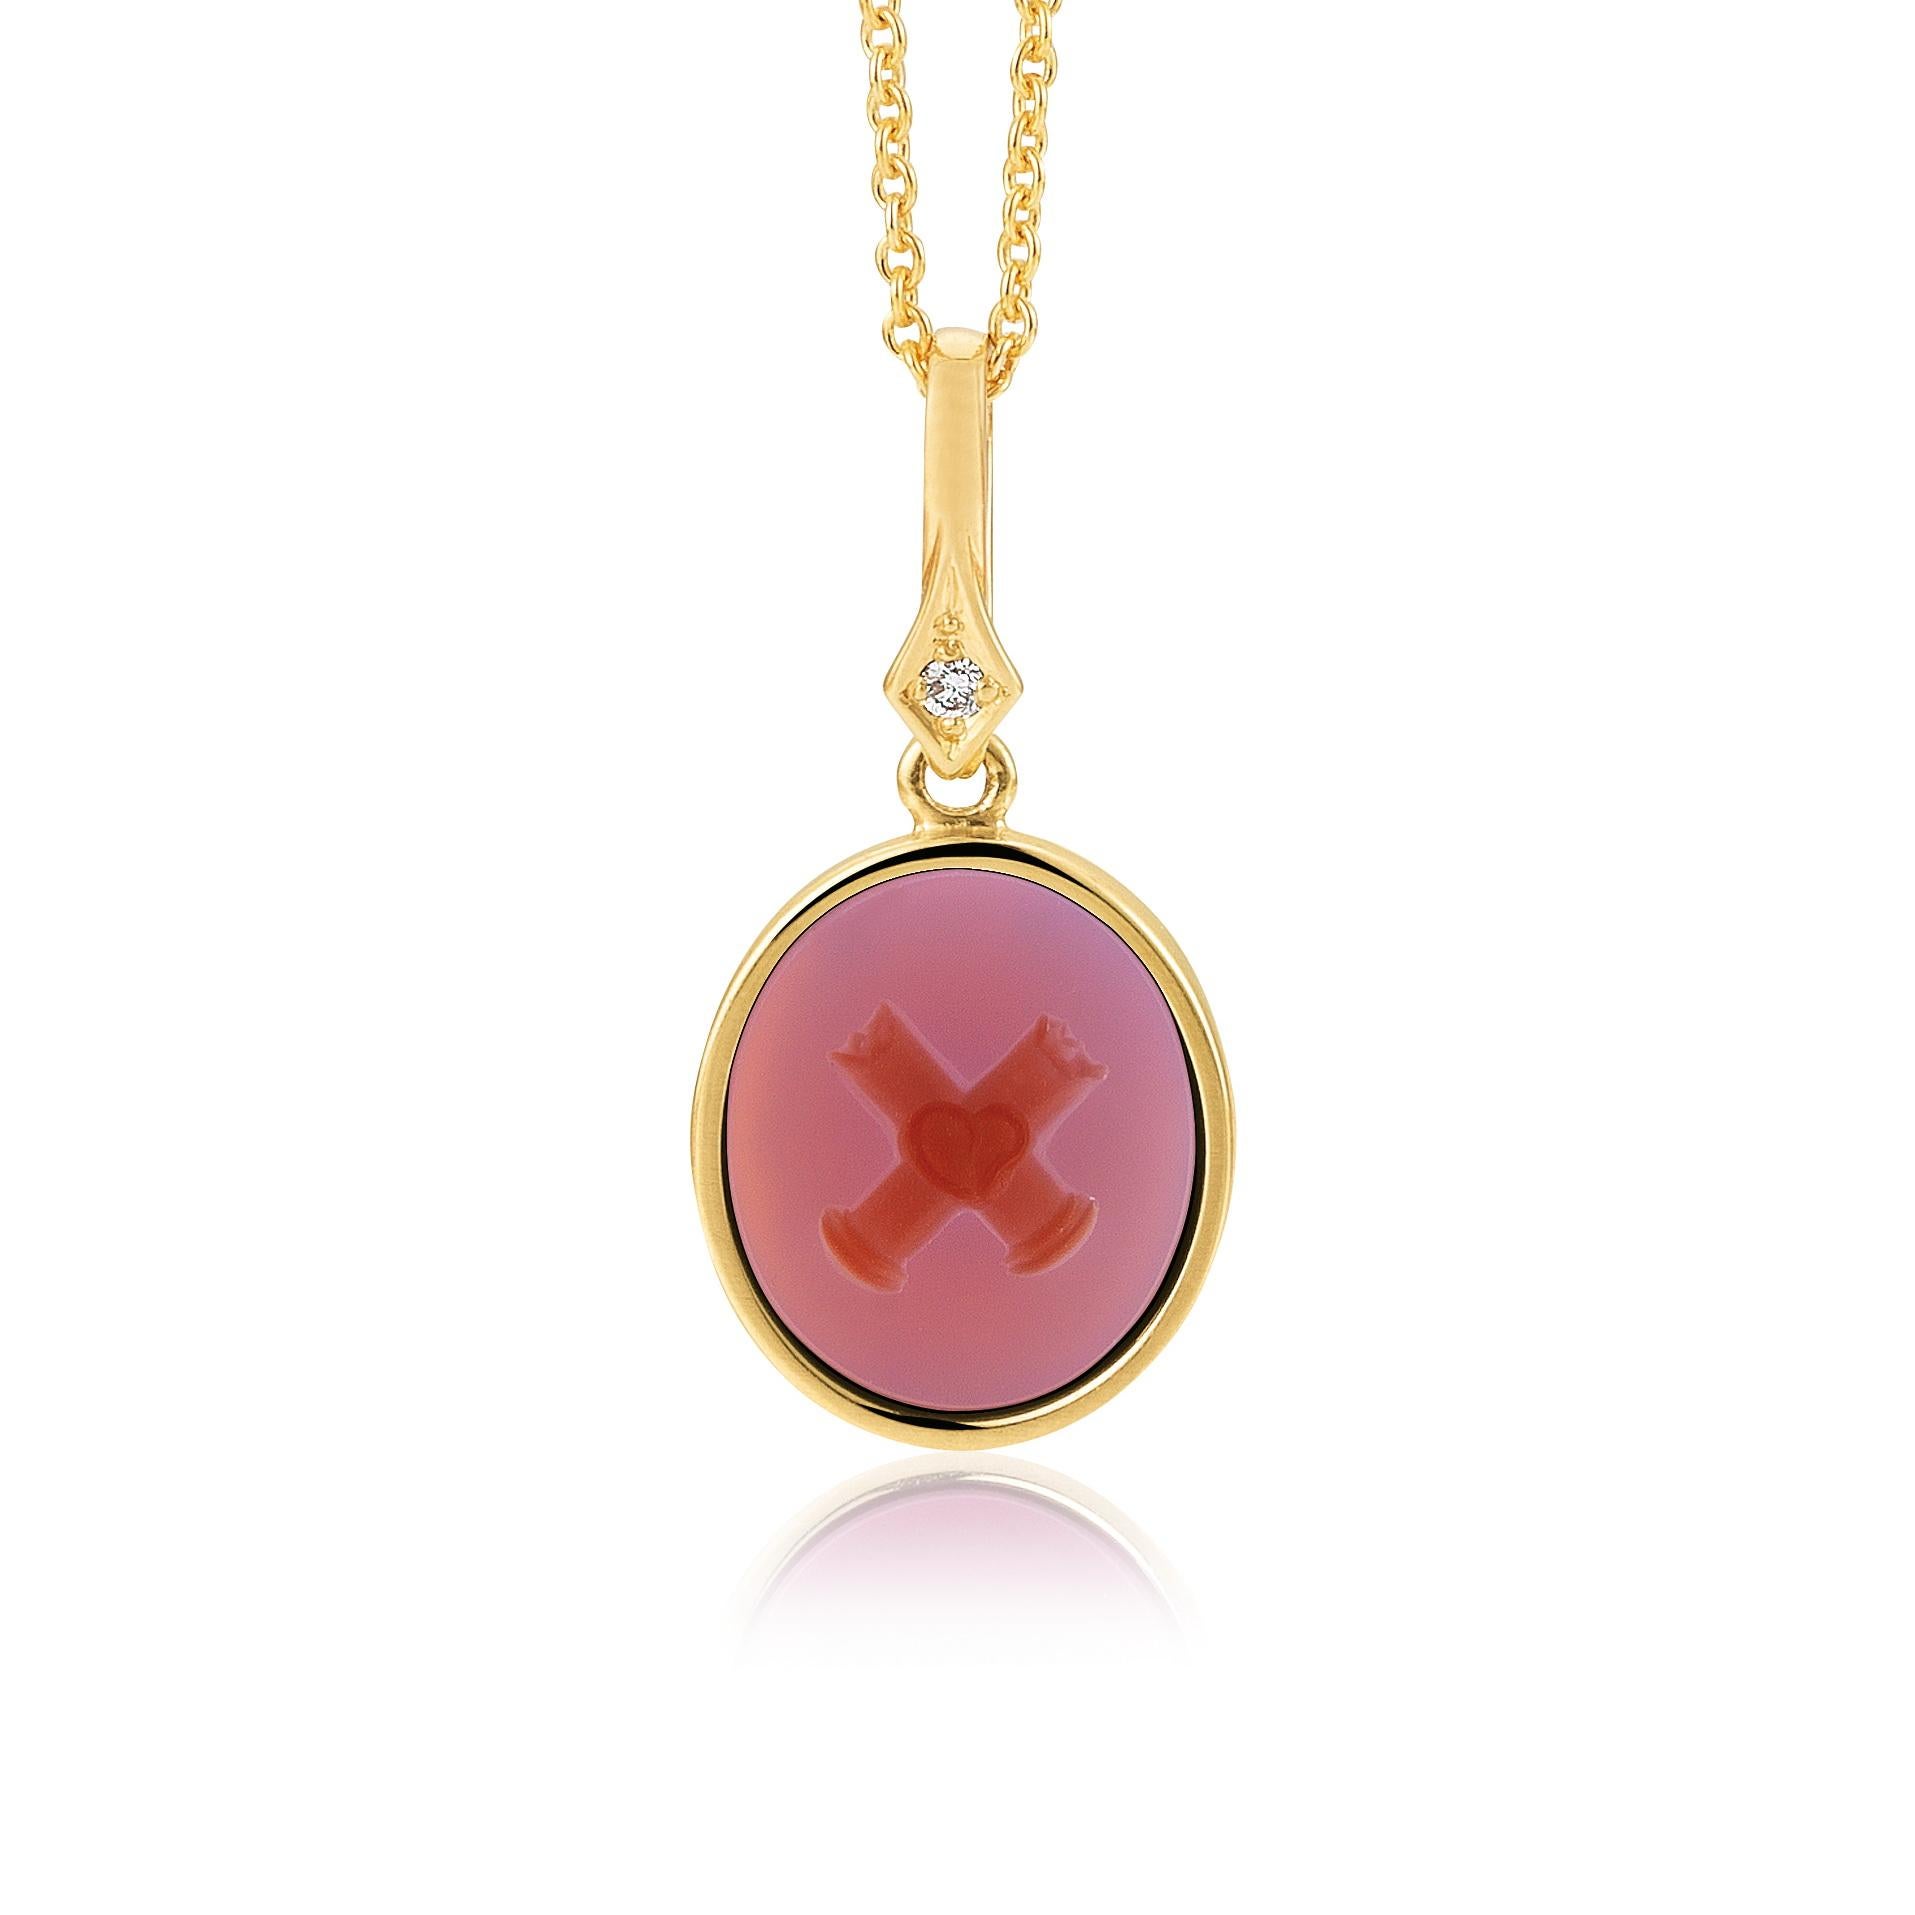 Contemporary Oval Fortitudo Pendant 18k Yellow Gold 1 Diamond 0.02 ct Pink Carnelian Onyx For Sale